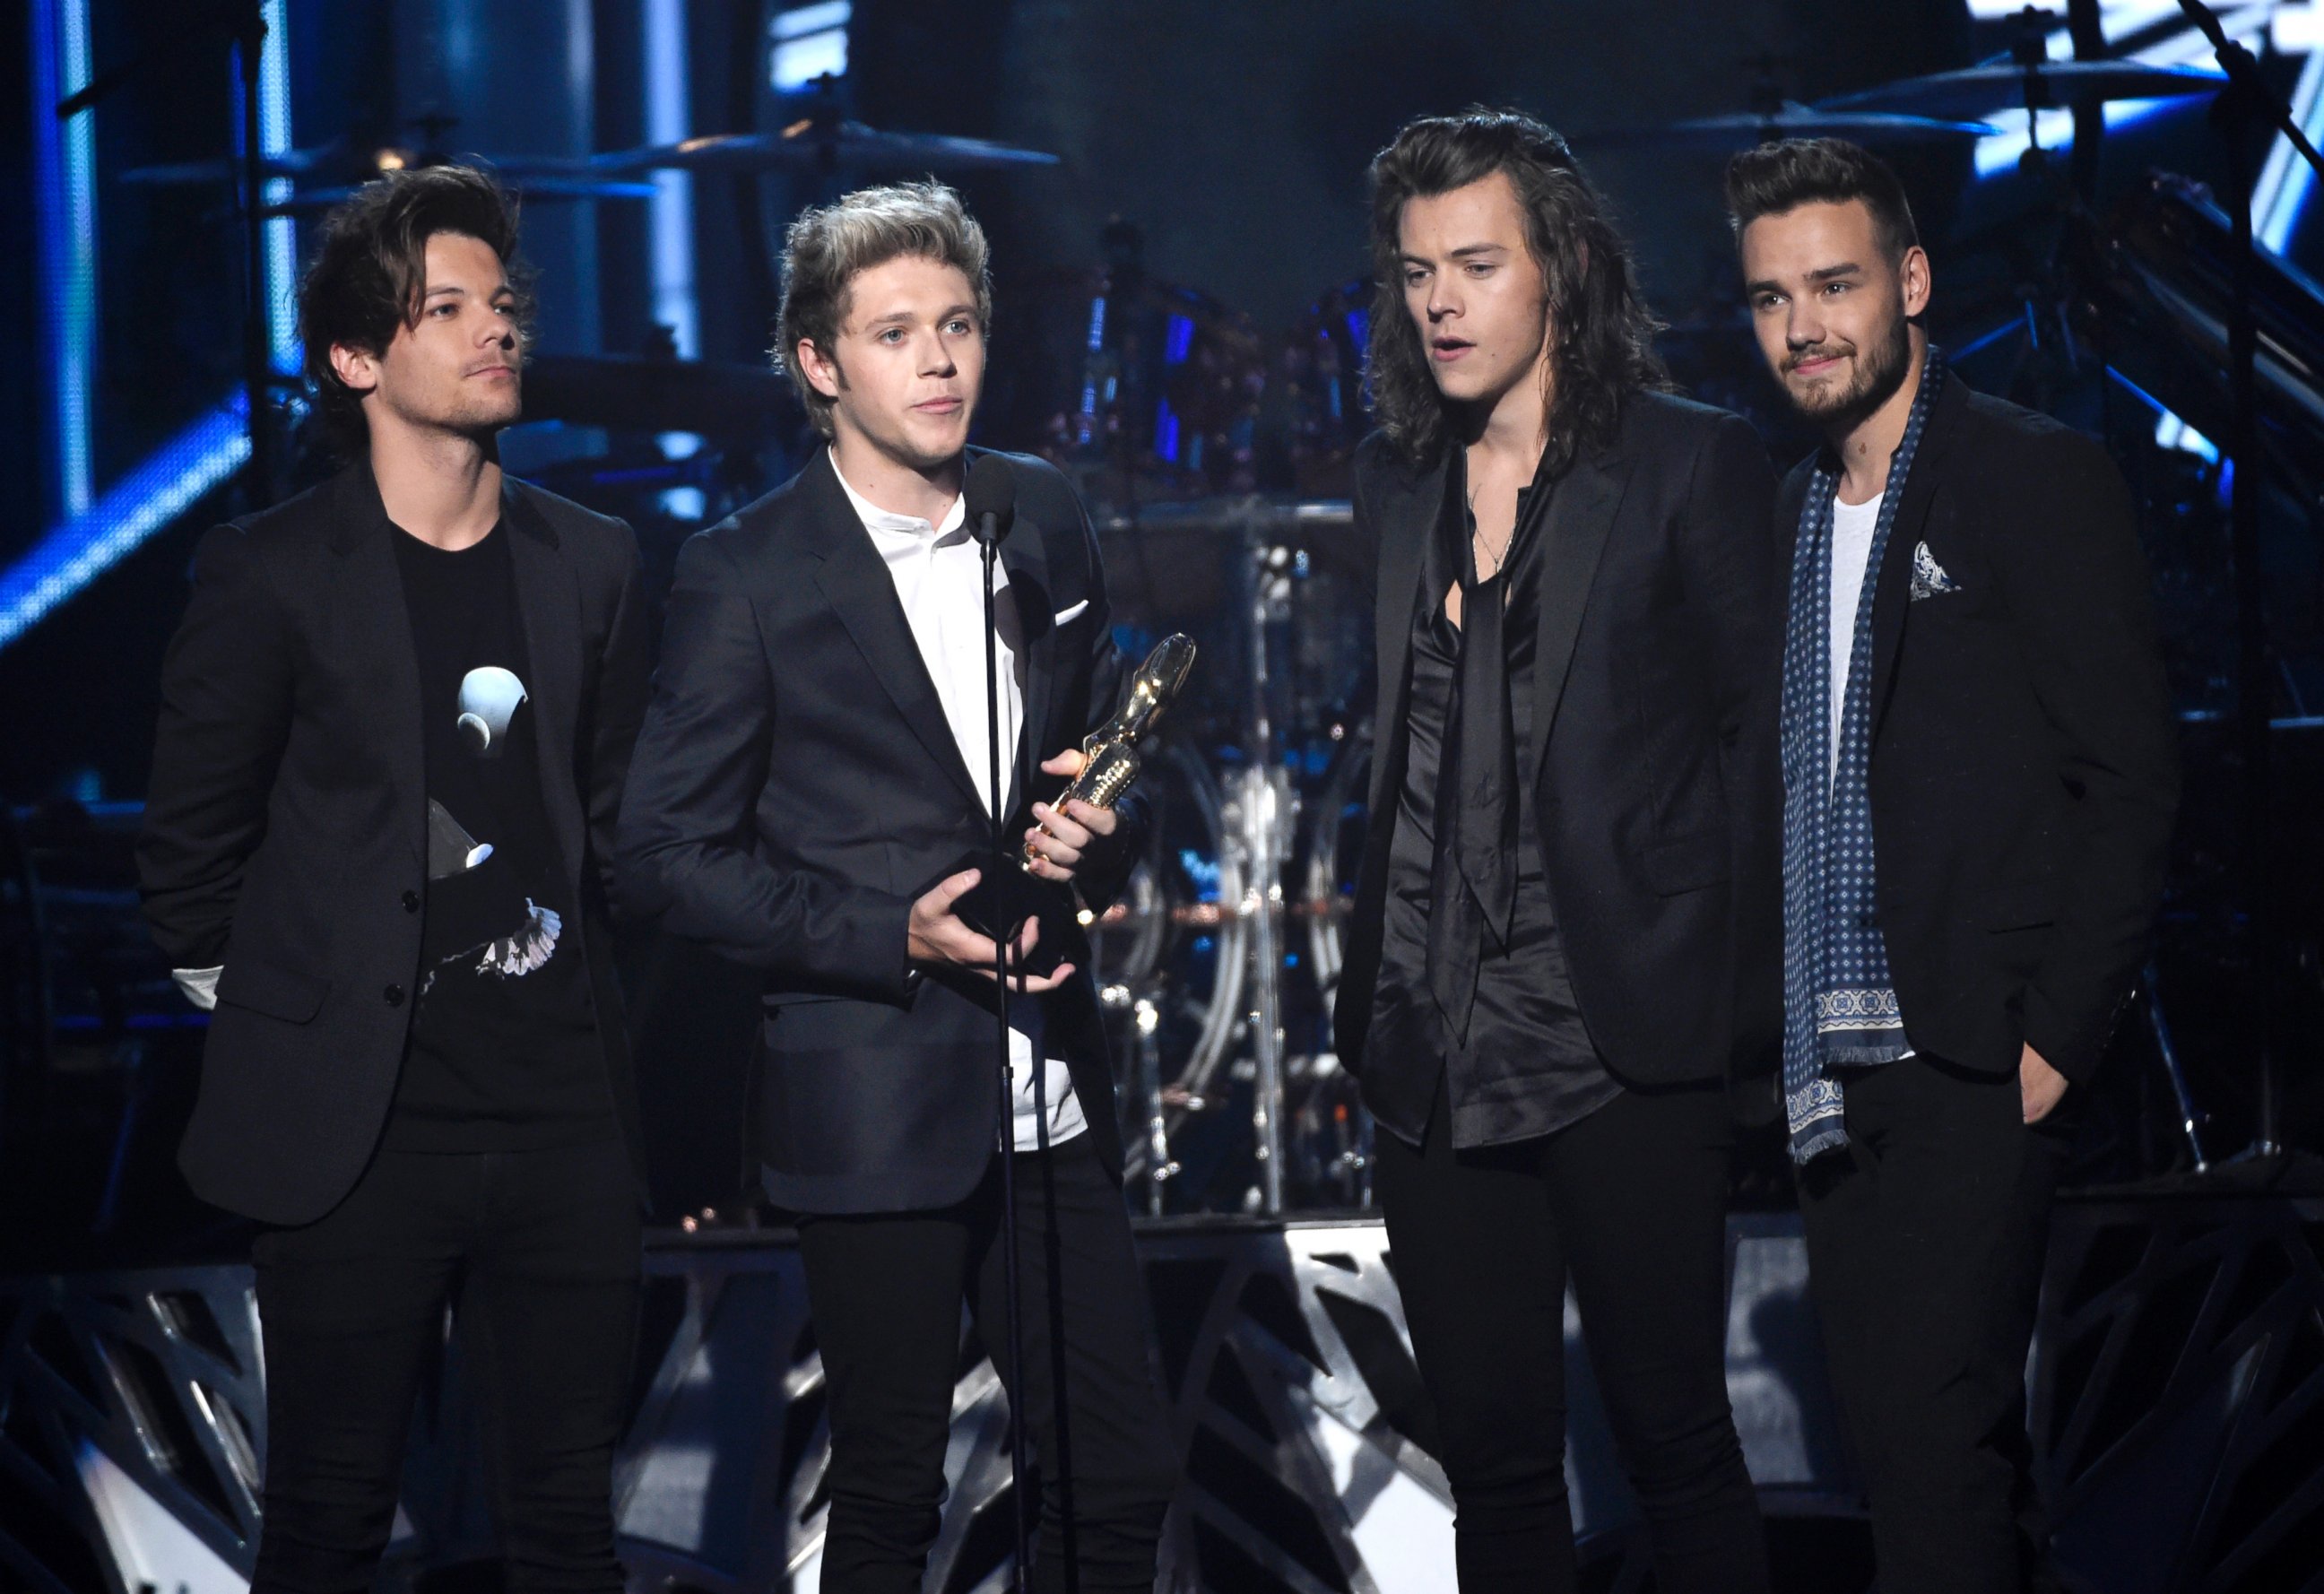 PHOTO: Louis Tomlinson, Niall Horan, Harry Styles, and Liam Payne of One Direction accept the award for top duo/group at the Billboard Music Awards at the MGM Grand Garden Arena, May 17, 2015, in Las Vegas.